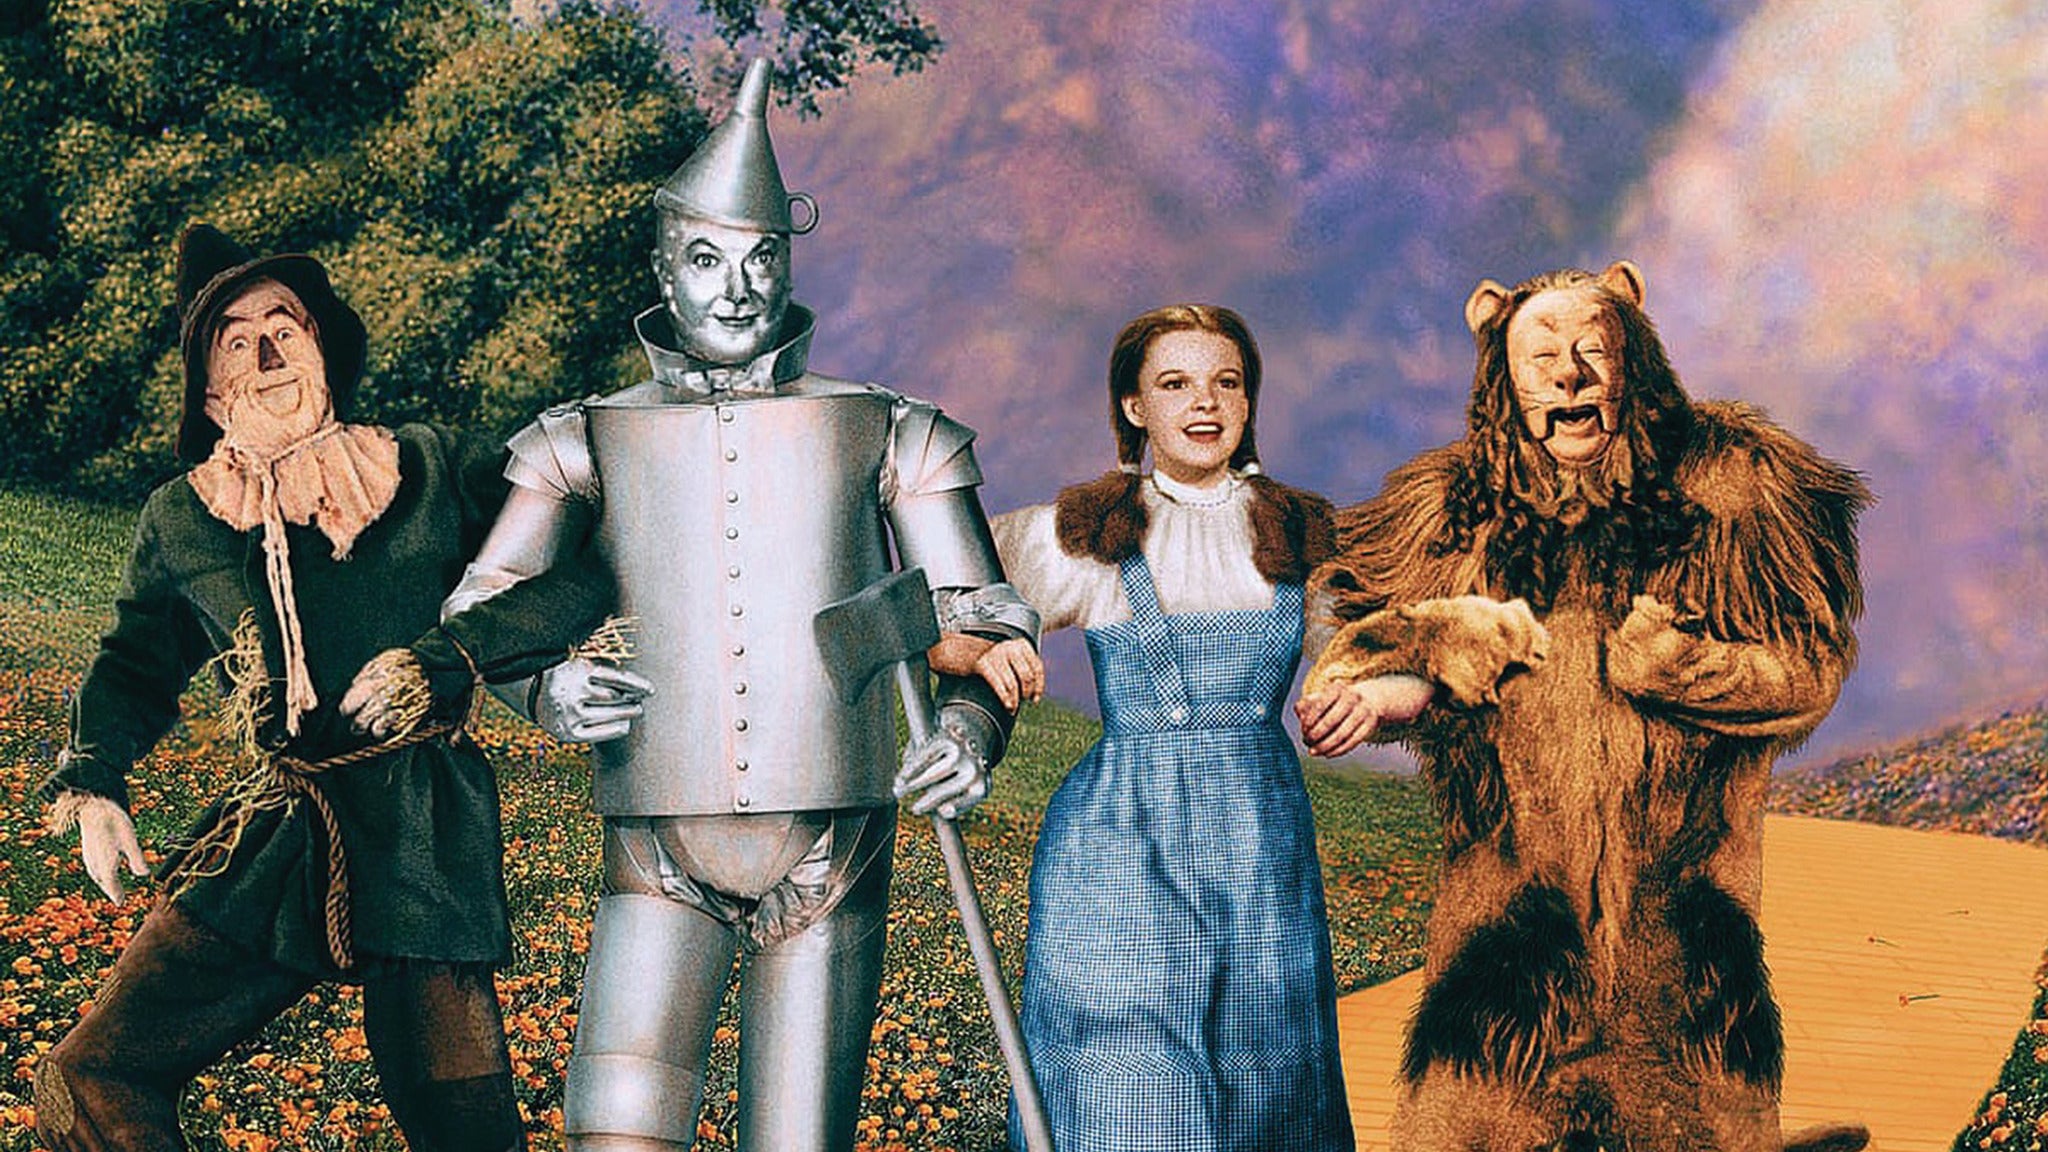 Wizard of Oz in Knoxville promo photo for Newsletter presale offer code